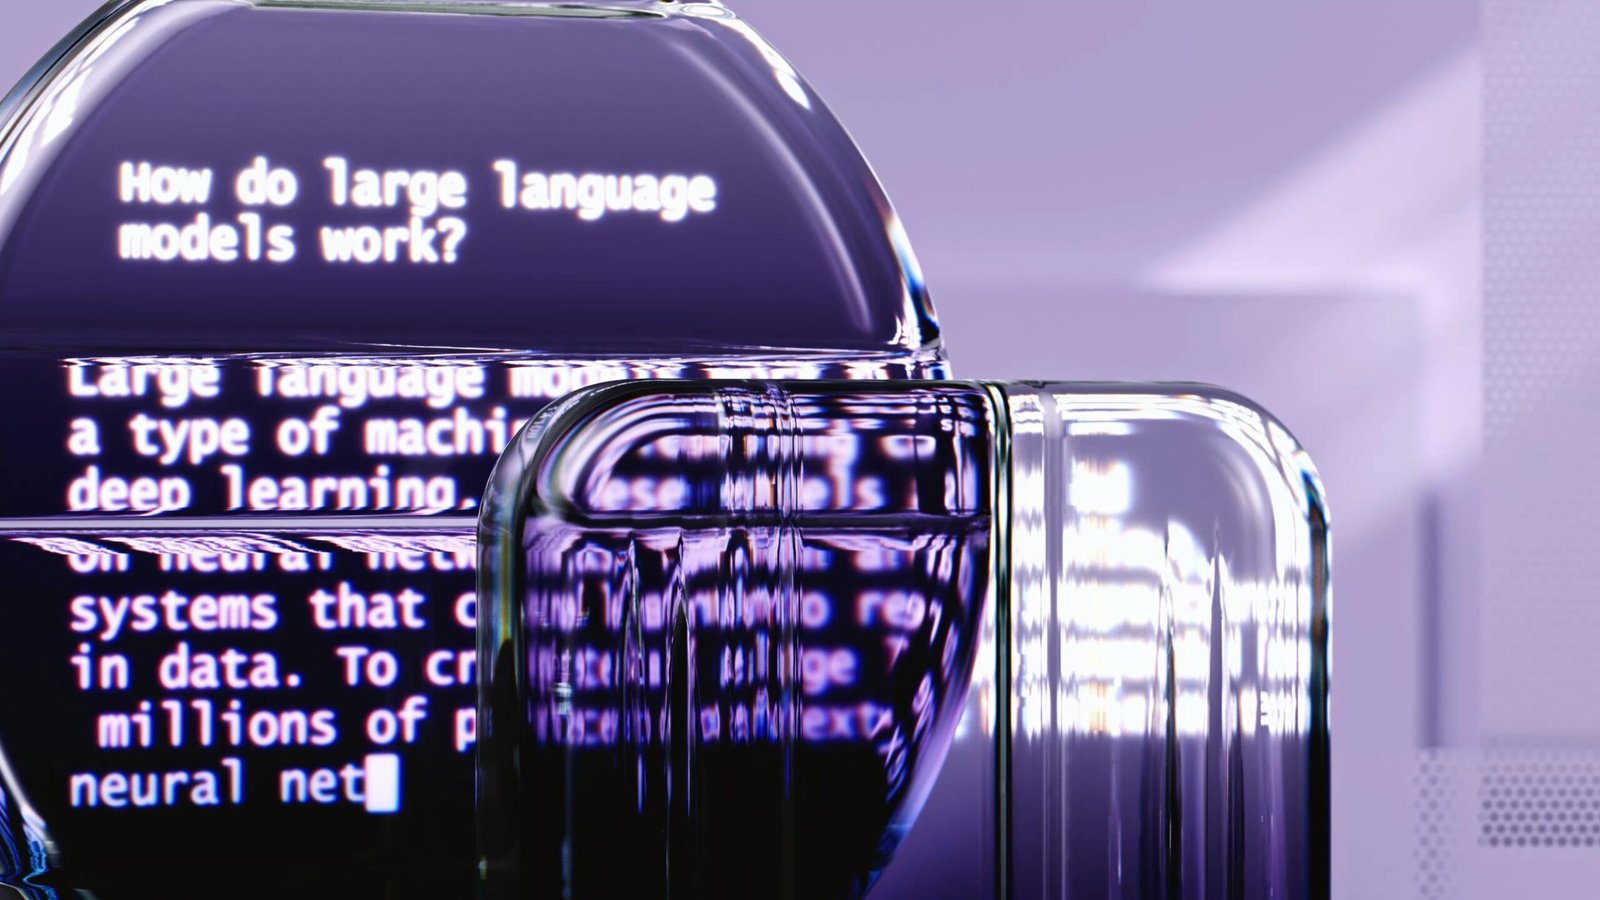 Role of AI helps to reduce the language barrier issue